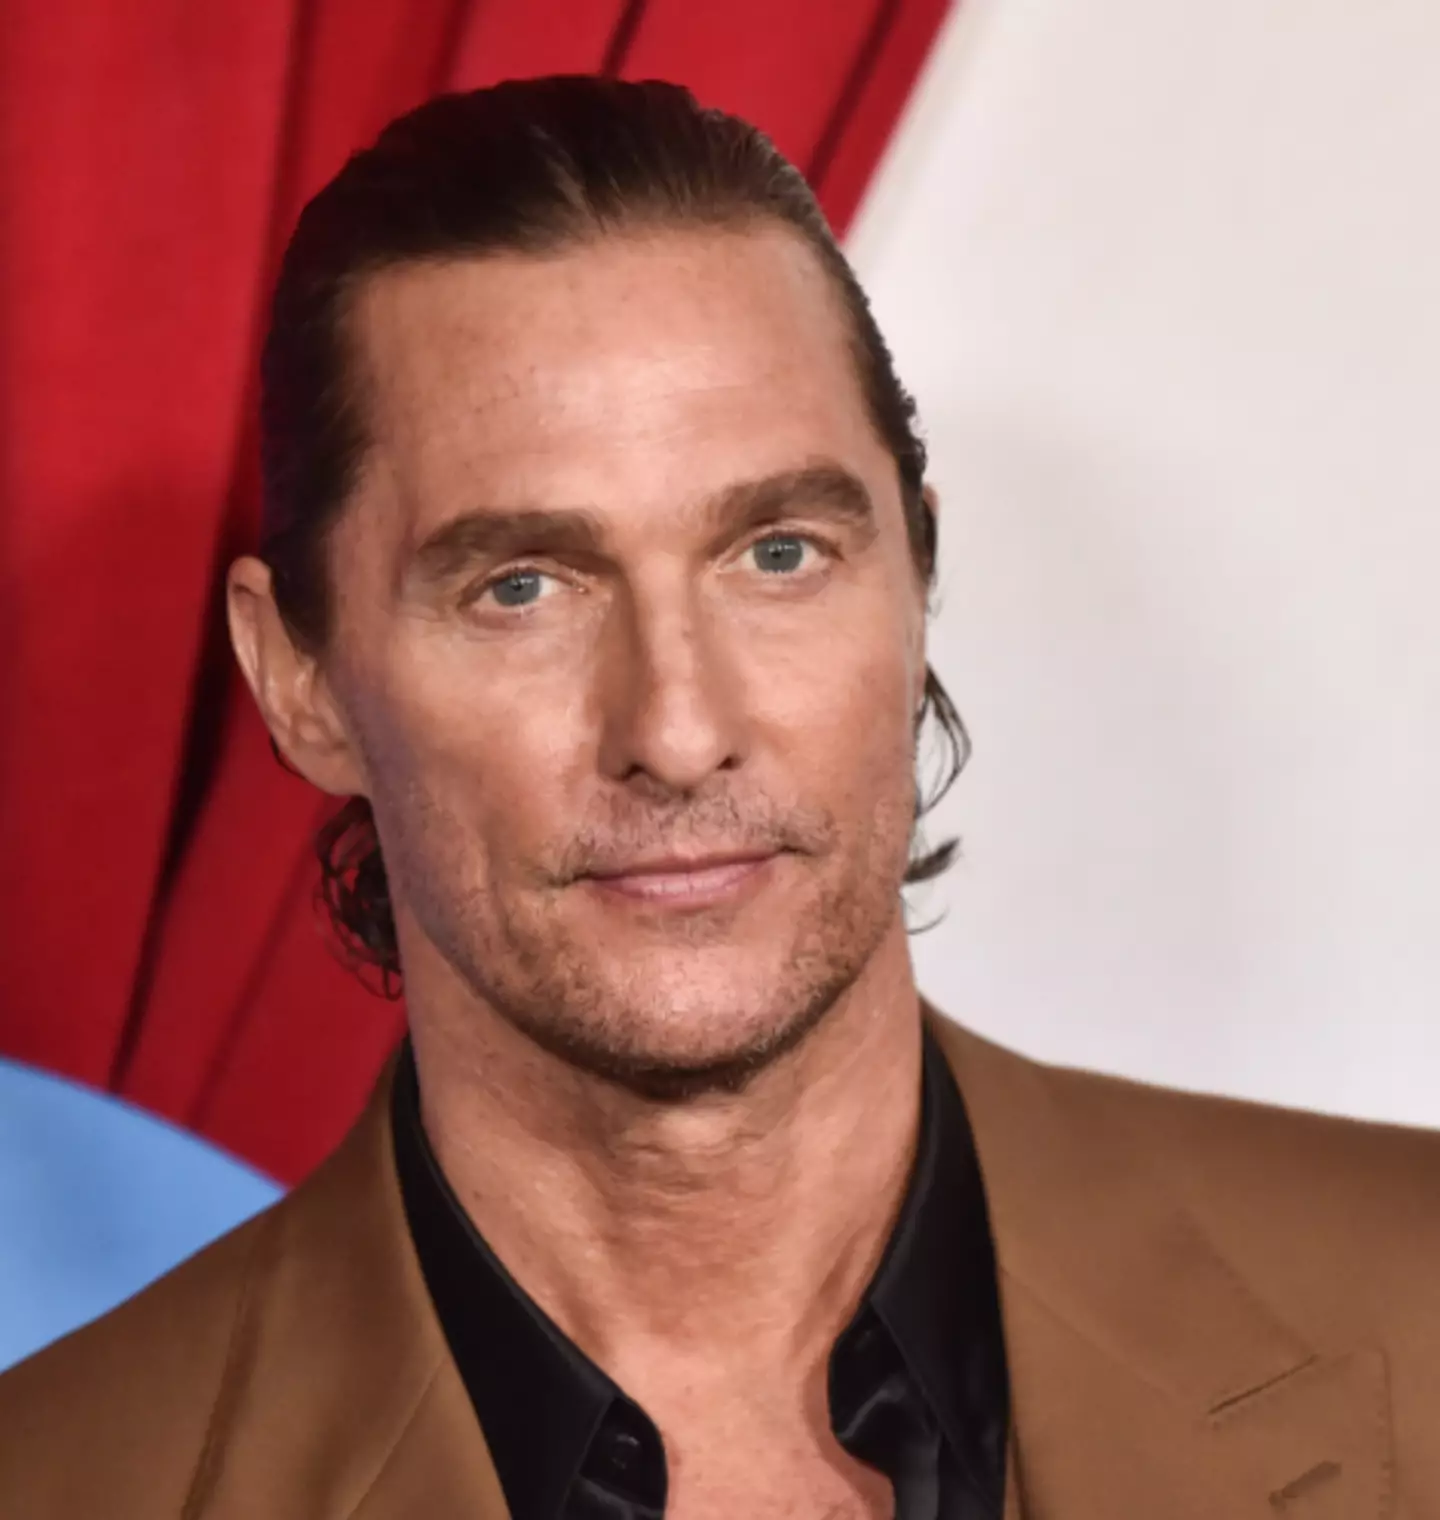 Matthew McConaughey has speaking about his experience on a plane that experienced severe turbulence.